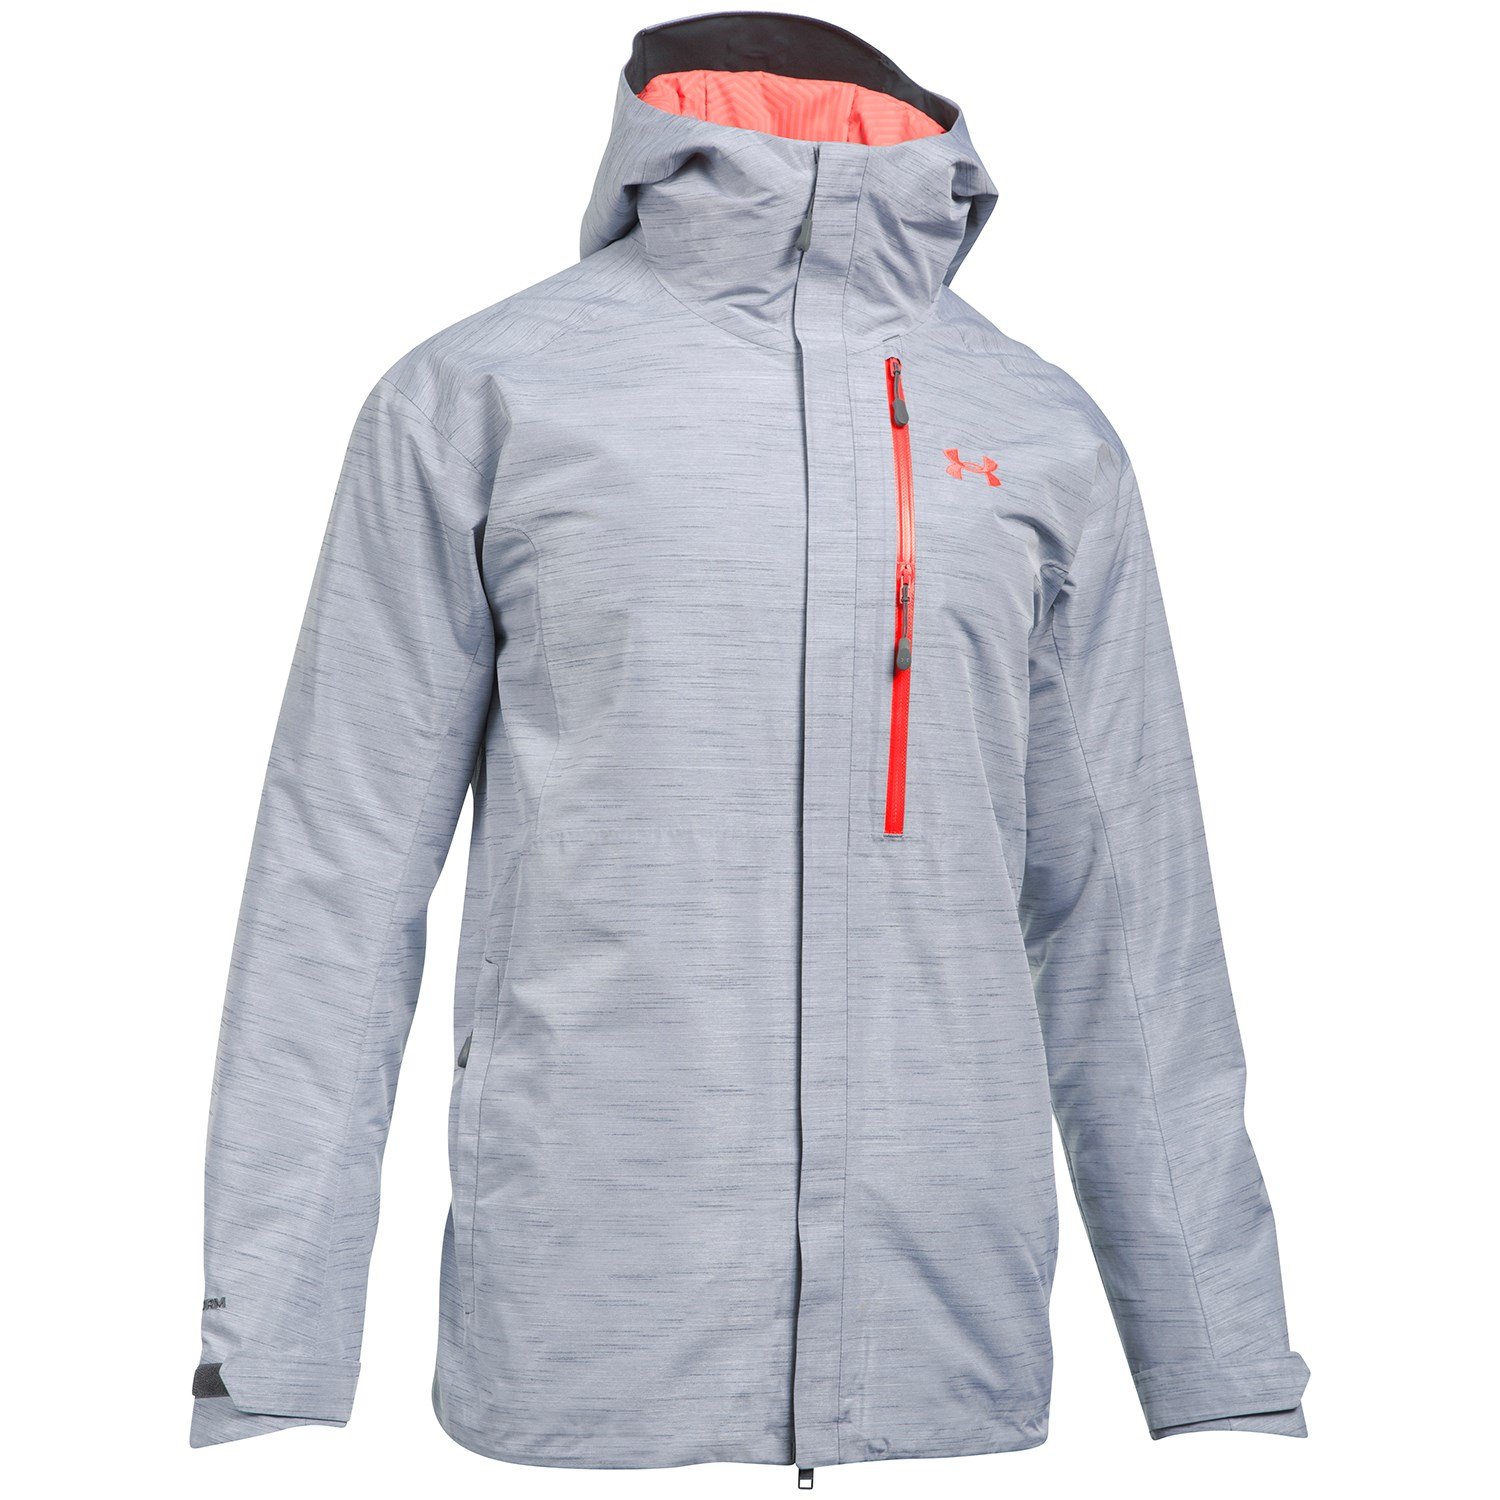 Cheap under armor jackets Buy Online 